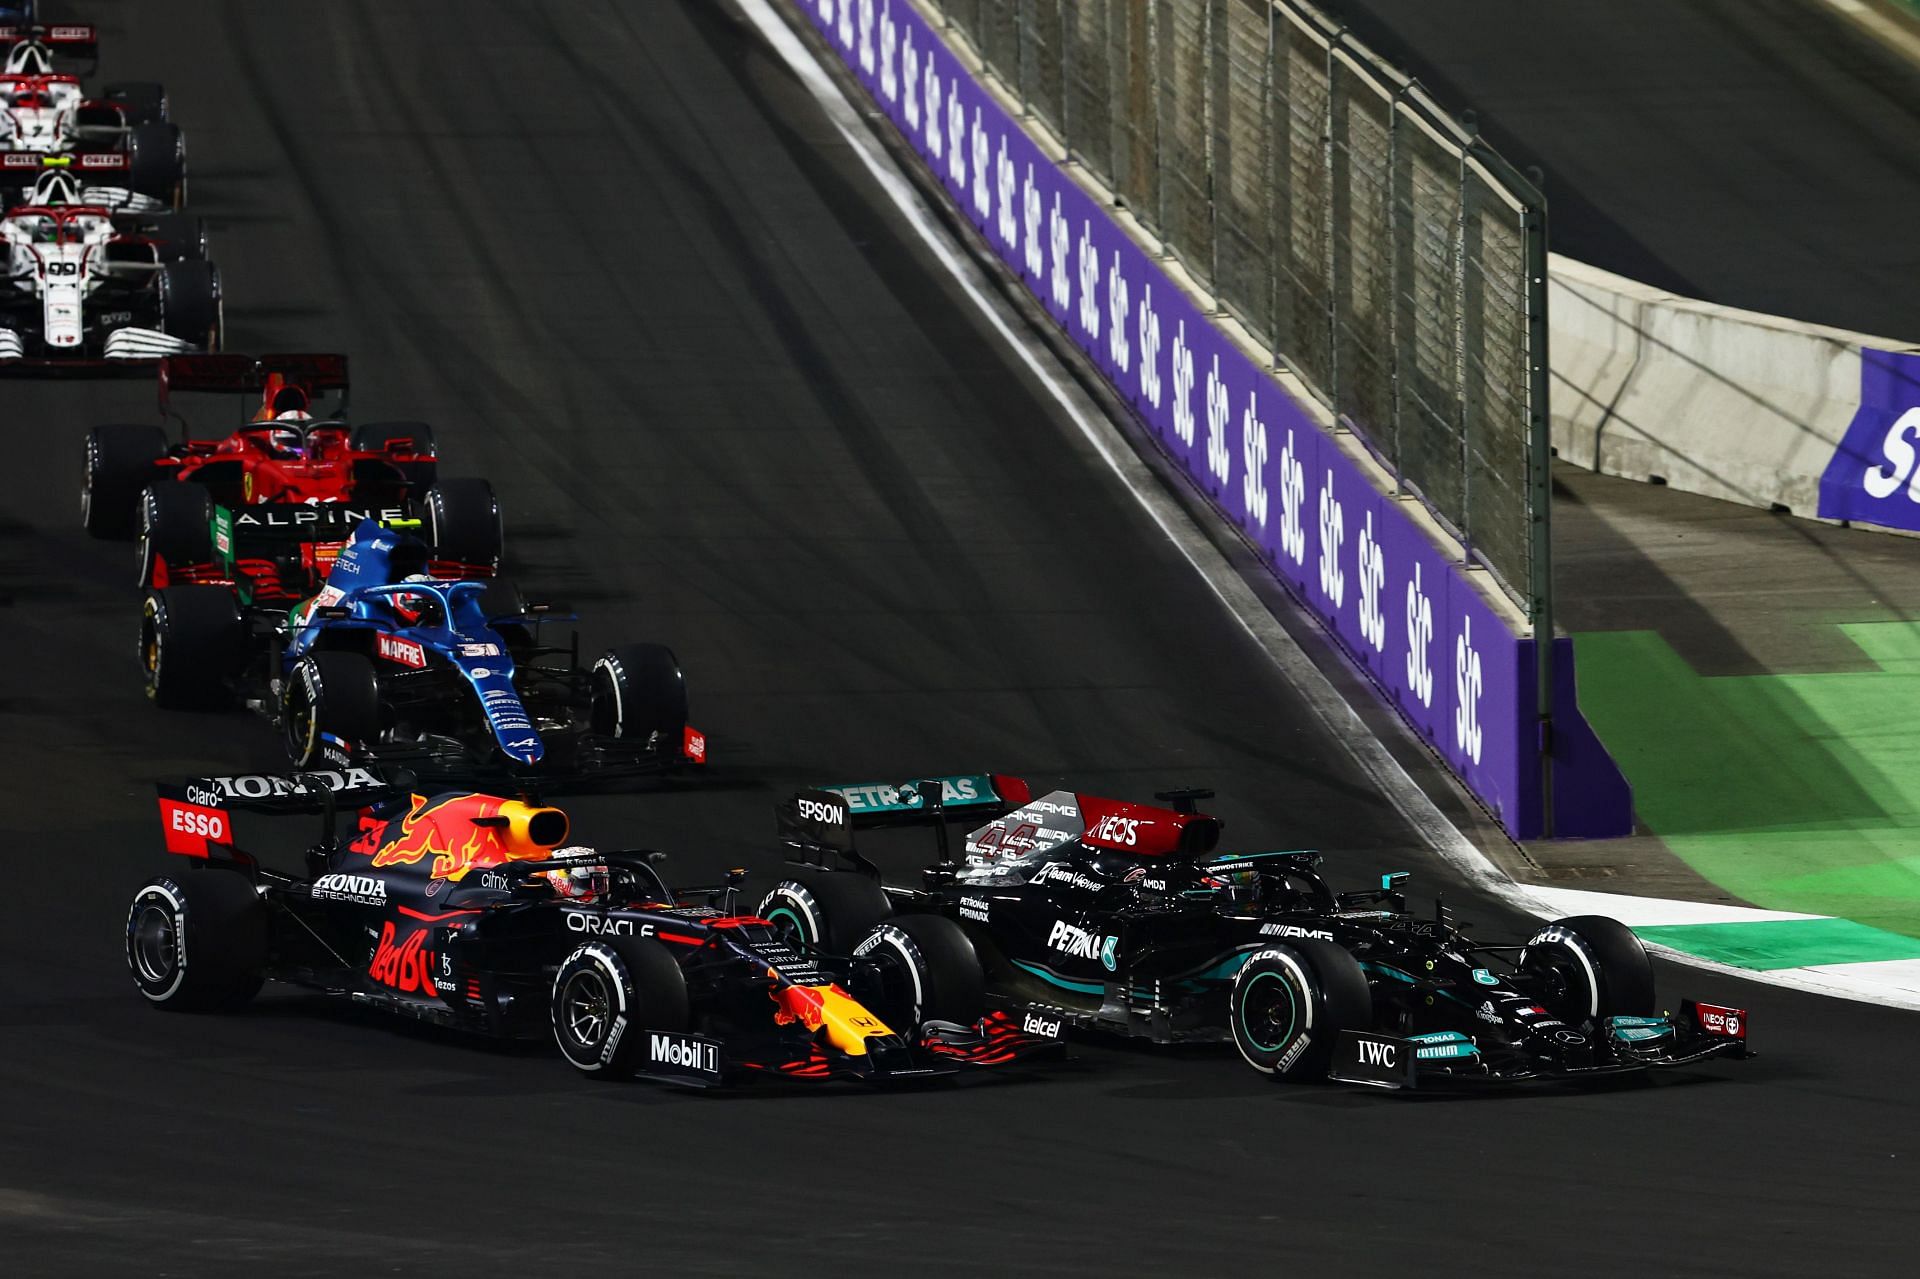 Max Verstappen (left) and Lewis Hamilton (right) battle for track position at the 2021 F1 Grand Prix of Saudi Arabia